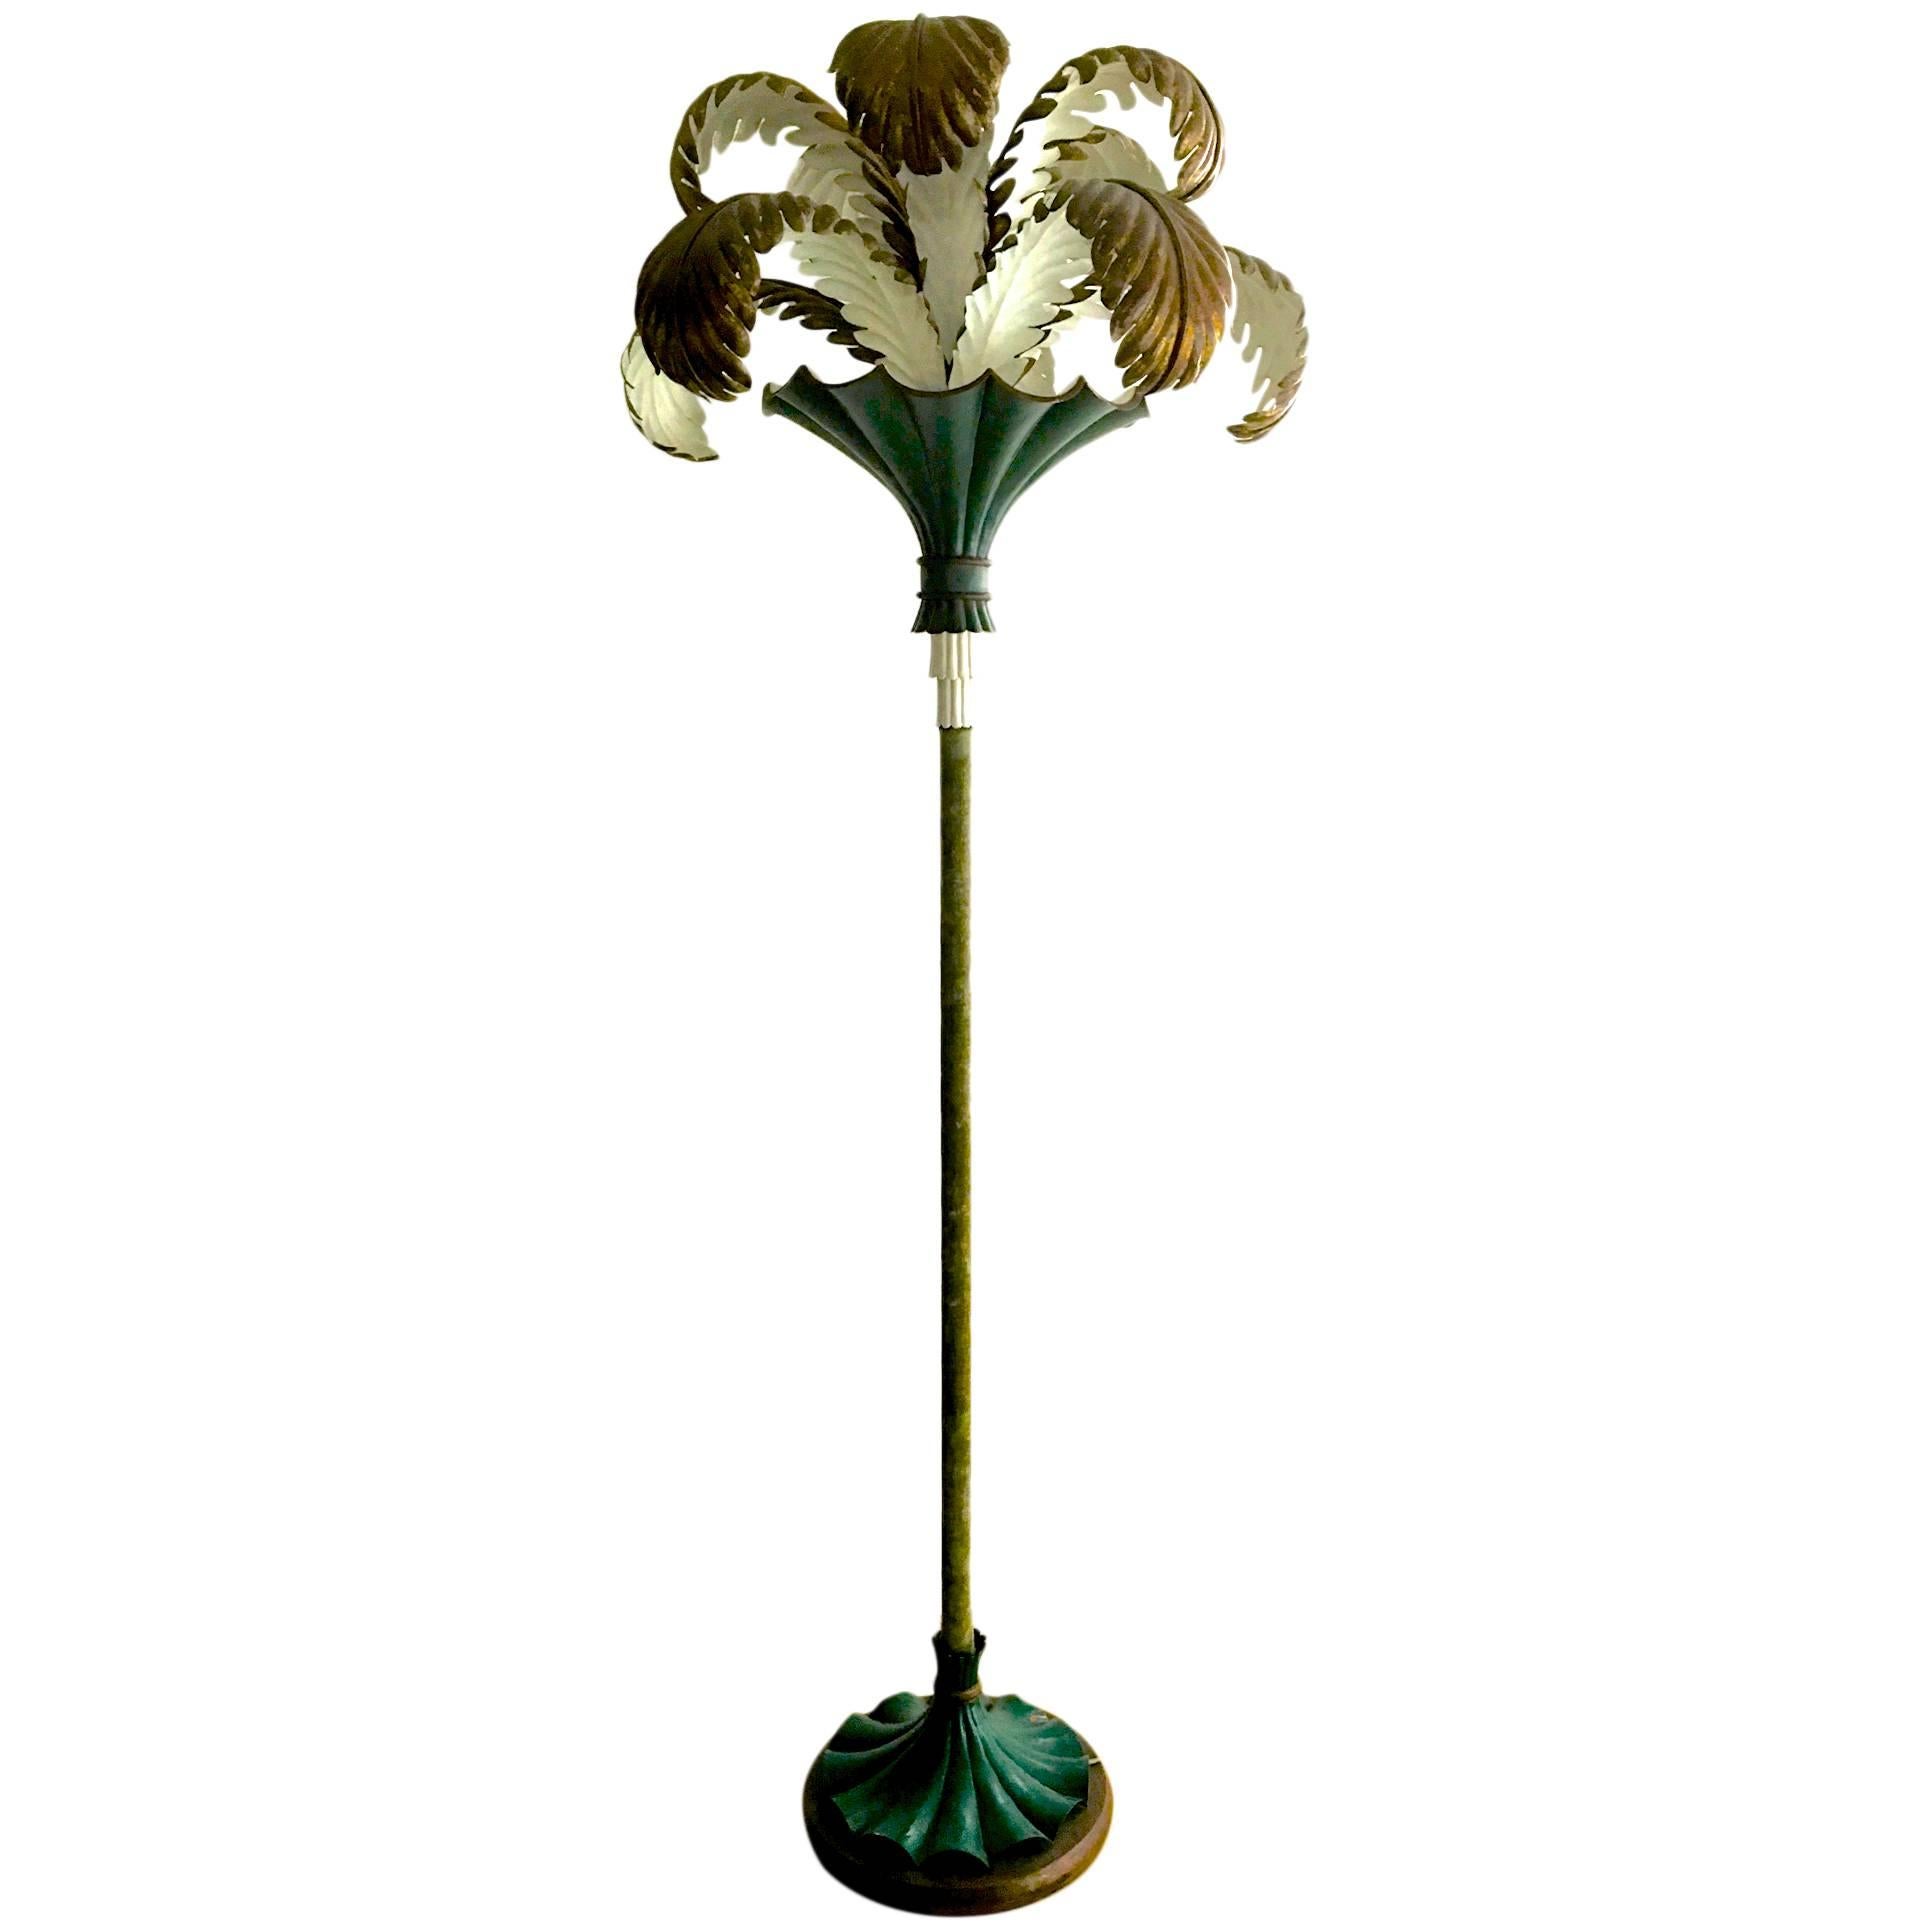 Maison Baguès Rare Baroque Floor Lamp with Tole Painted Leaves For Sale